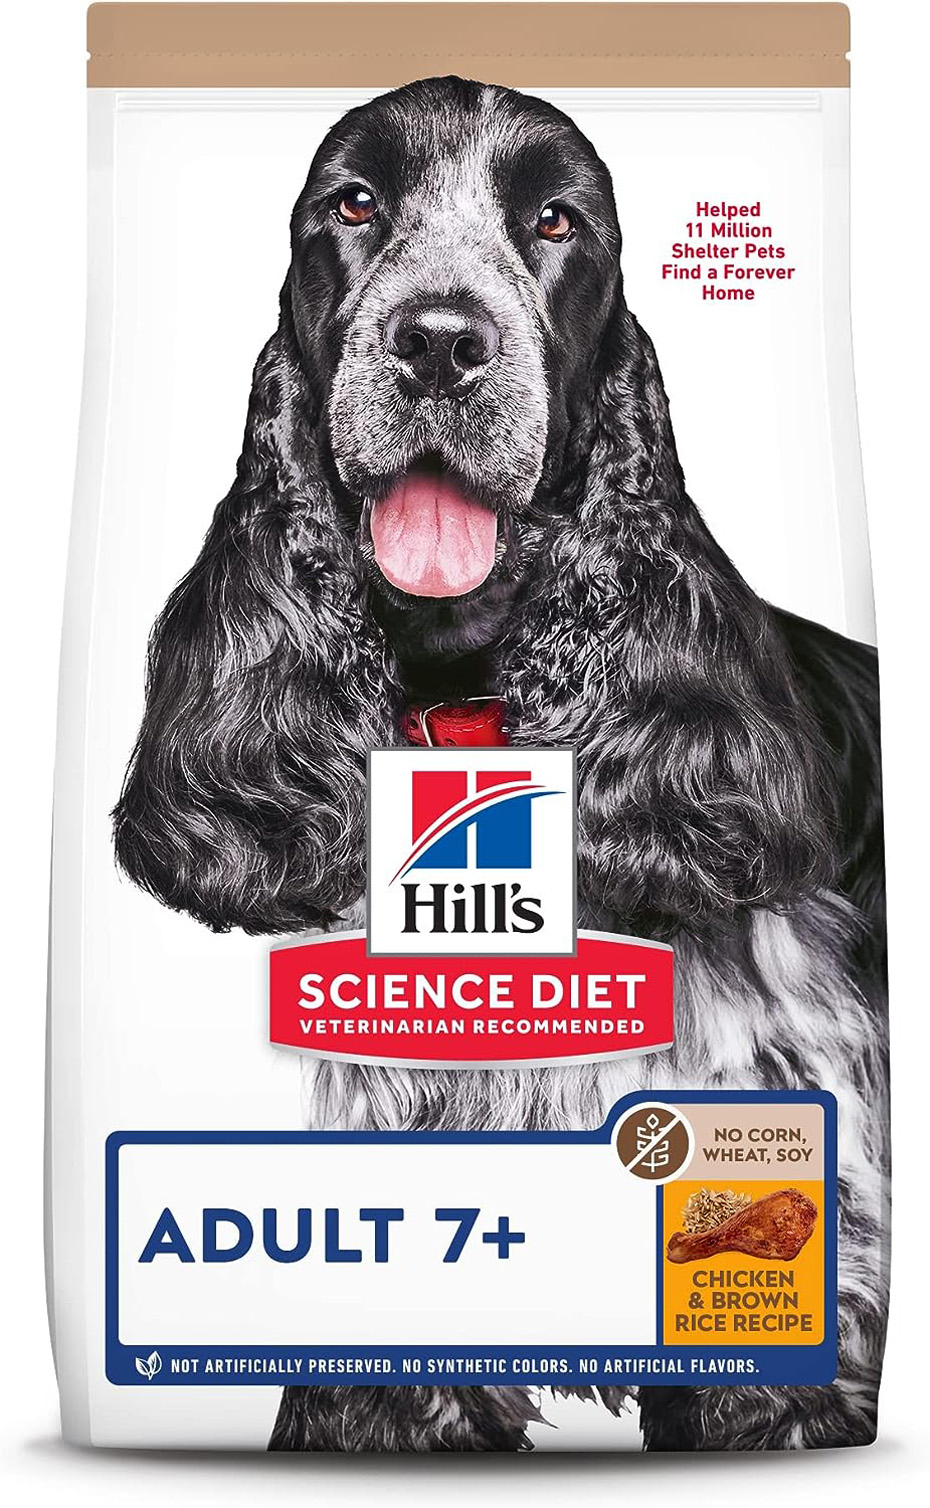 Hill’s Science Diet Adult 7+ No Corn, Wheat or Soy Chicken & Brown Rice Recipe Dry Dog Food